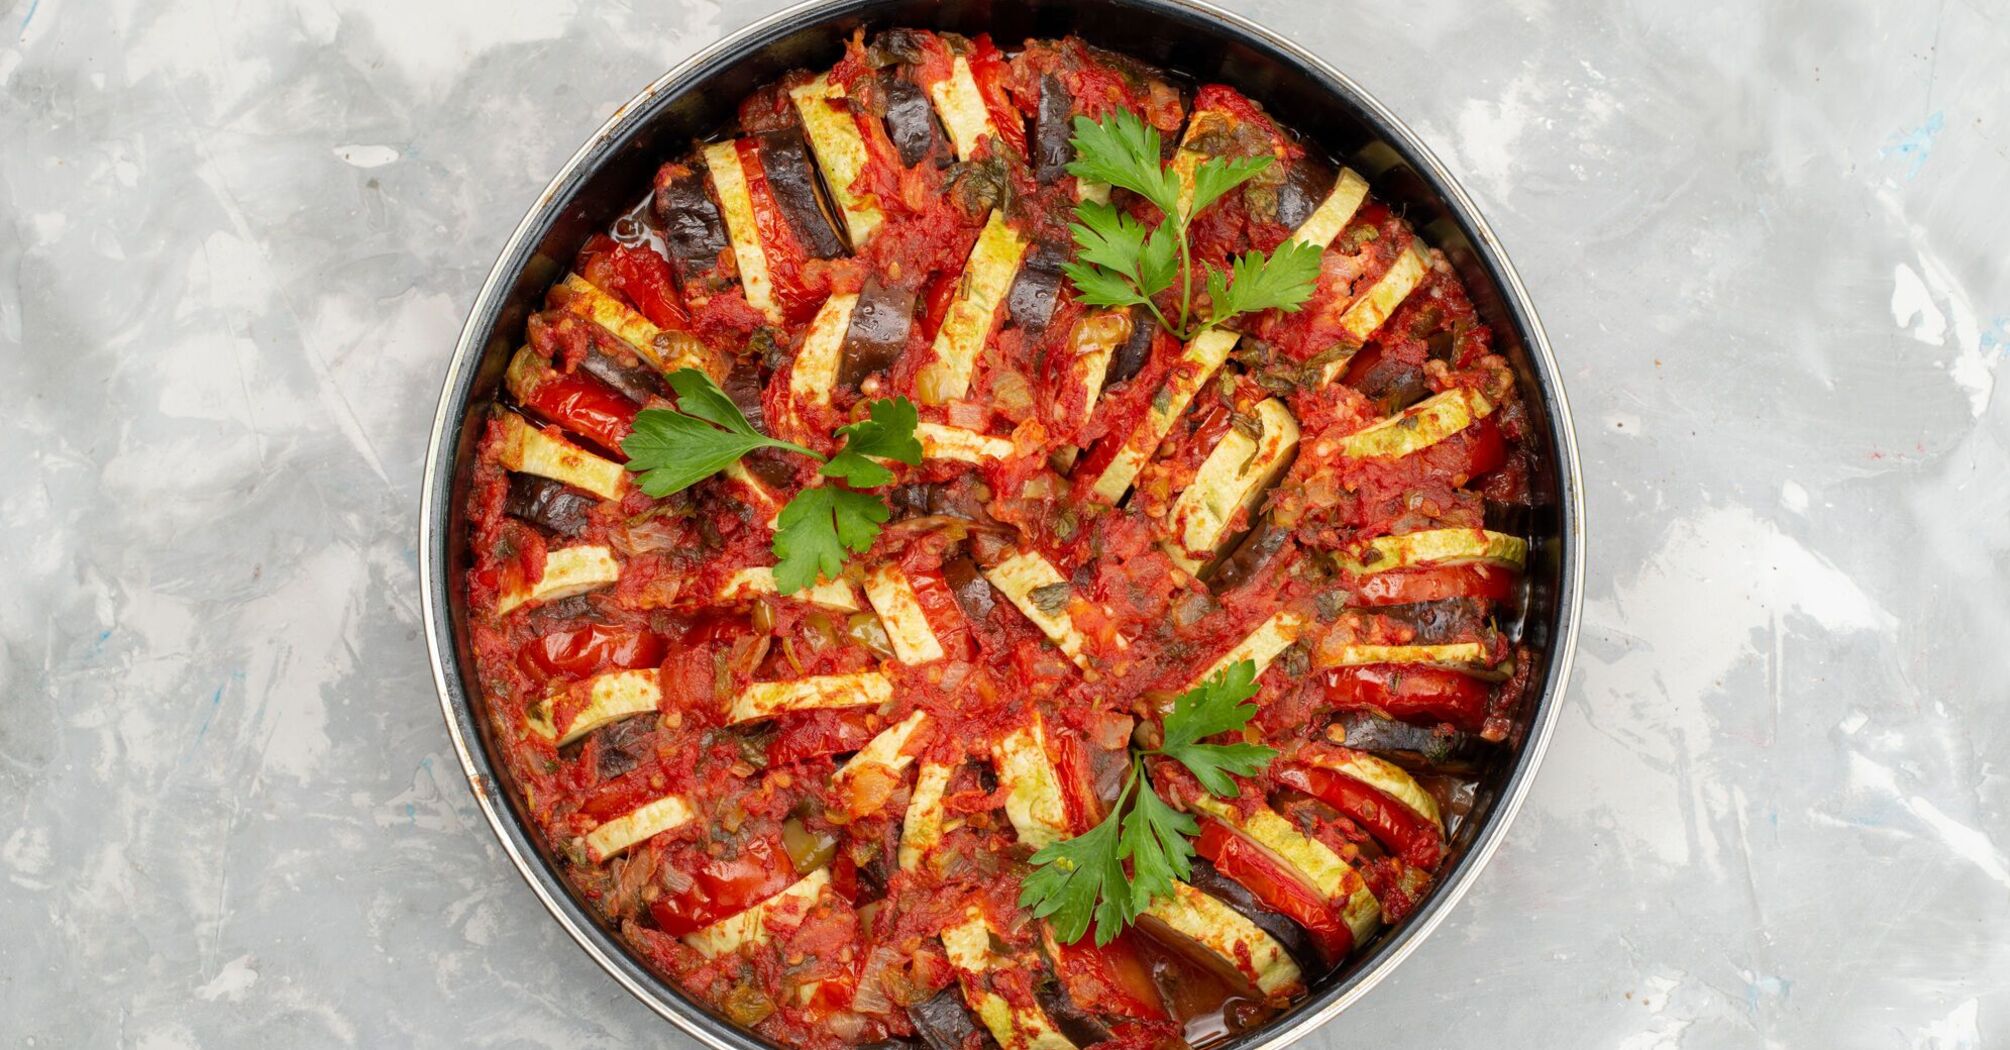 Eggplant ratatouille with minced meat and hot sauce: a recipe for a hearty dinner dish